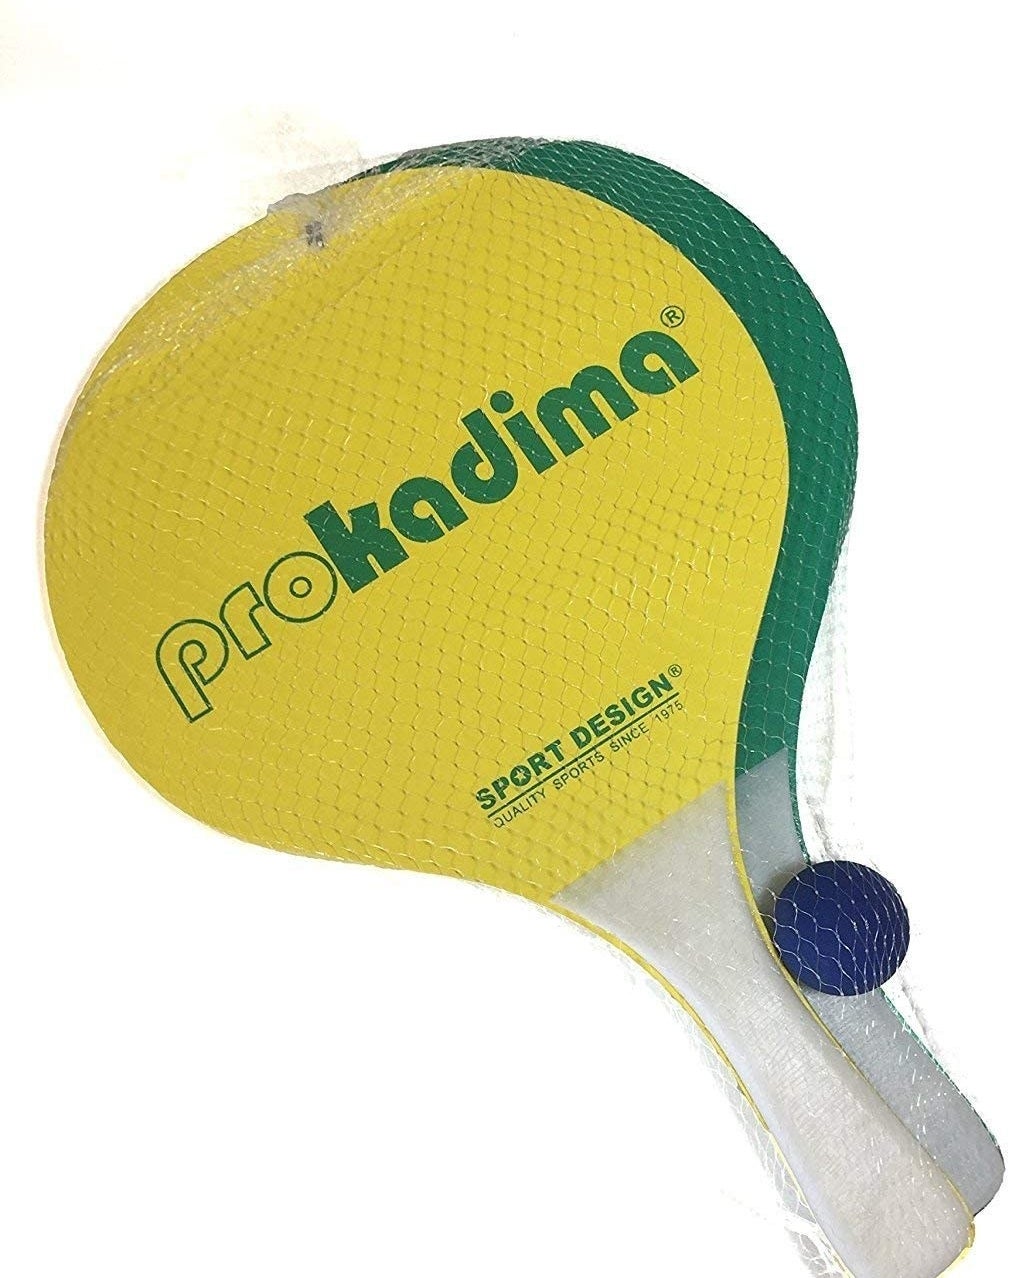 Yellow and green Pro Kadima paddles and blue ball packed in netting